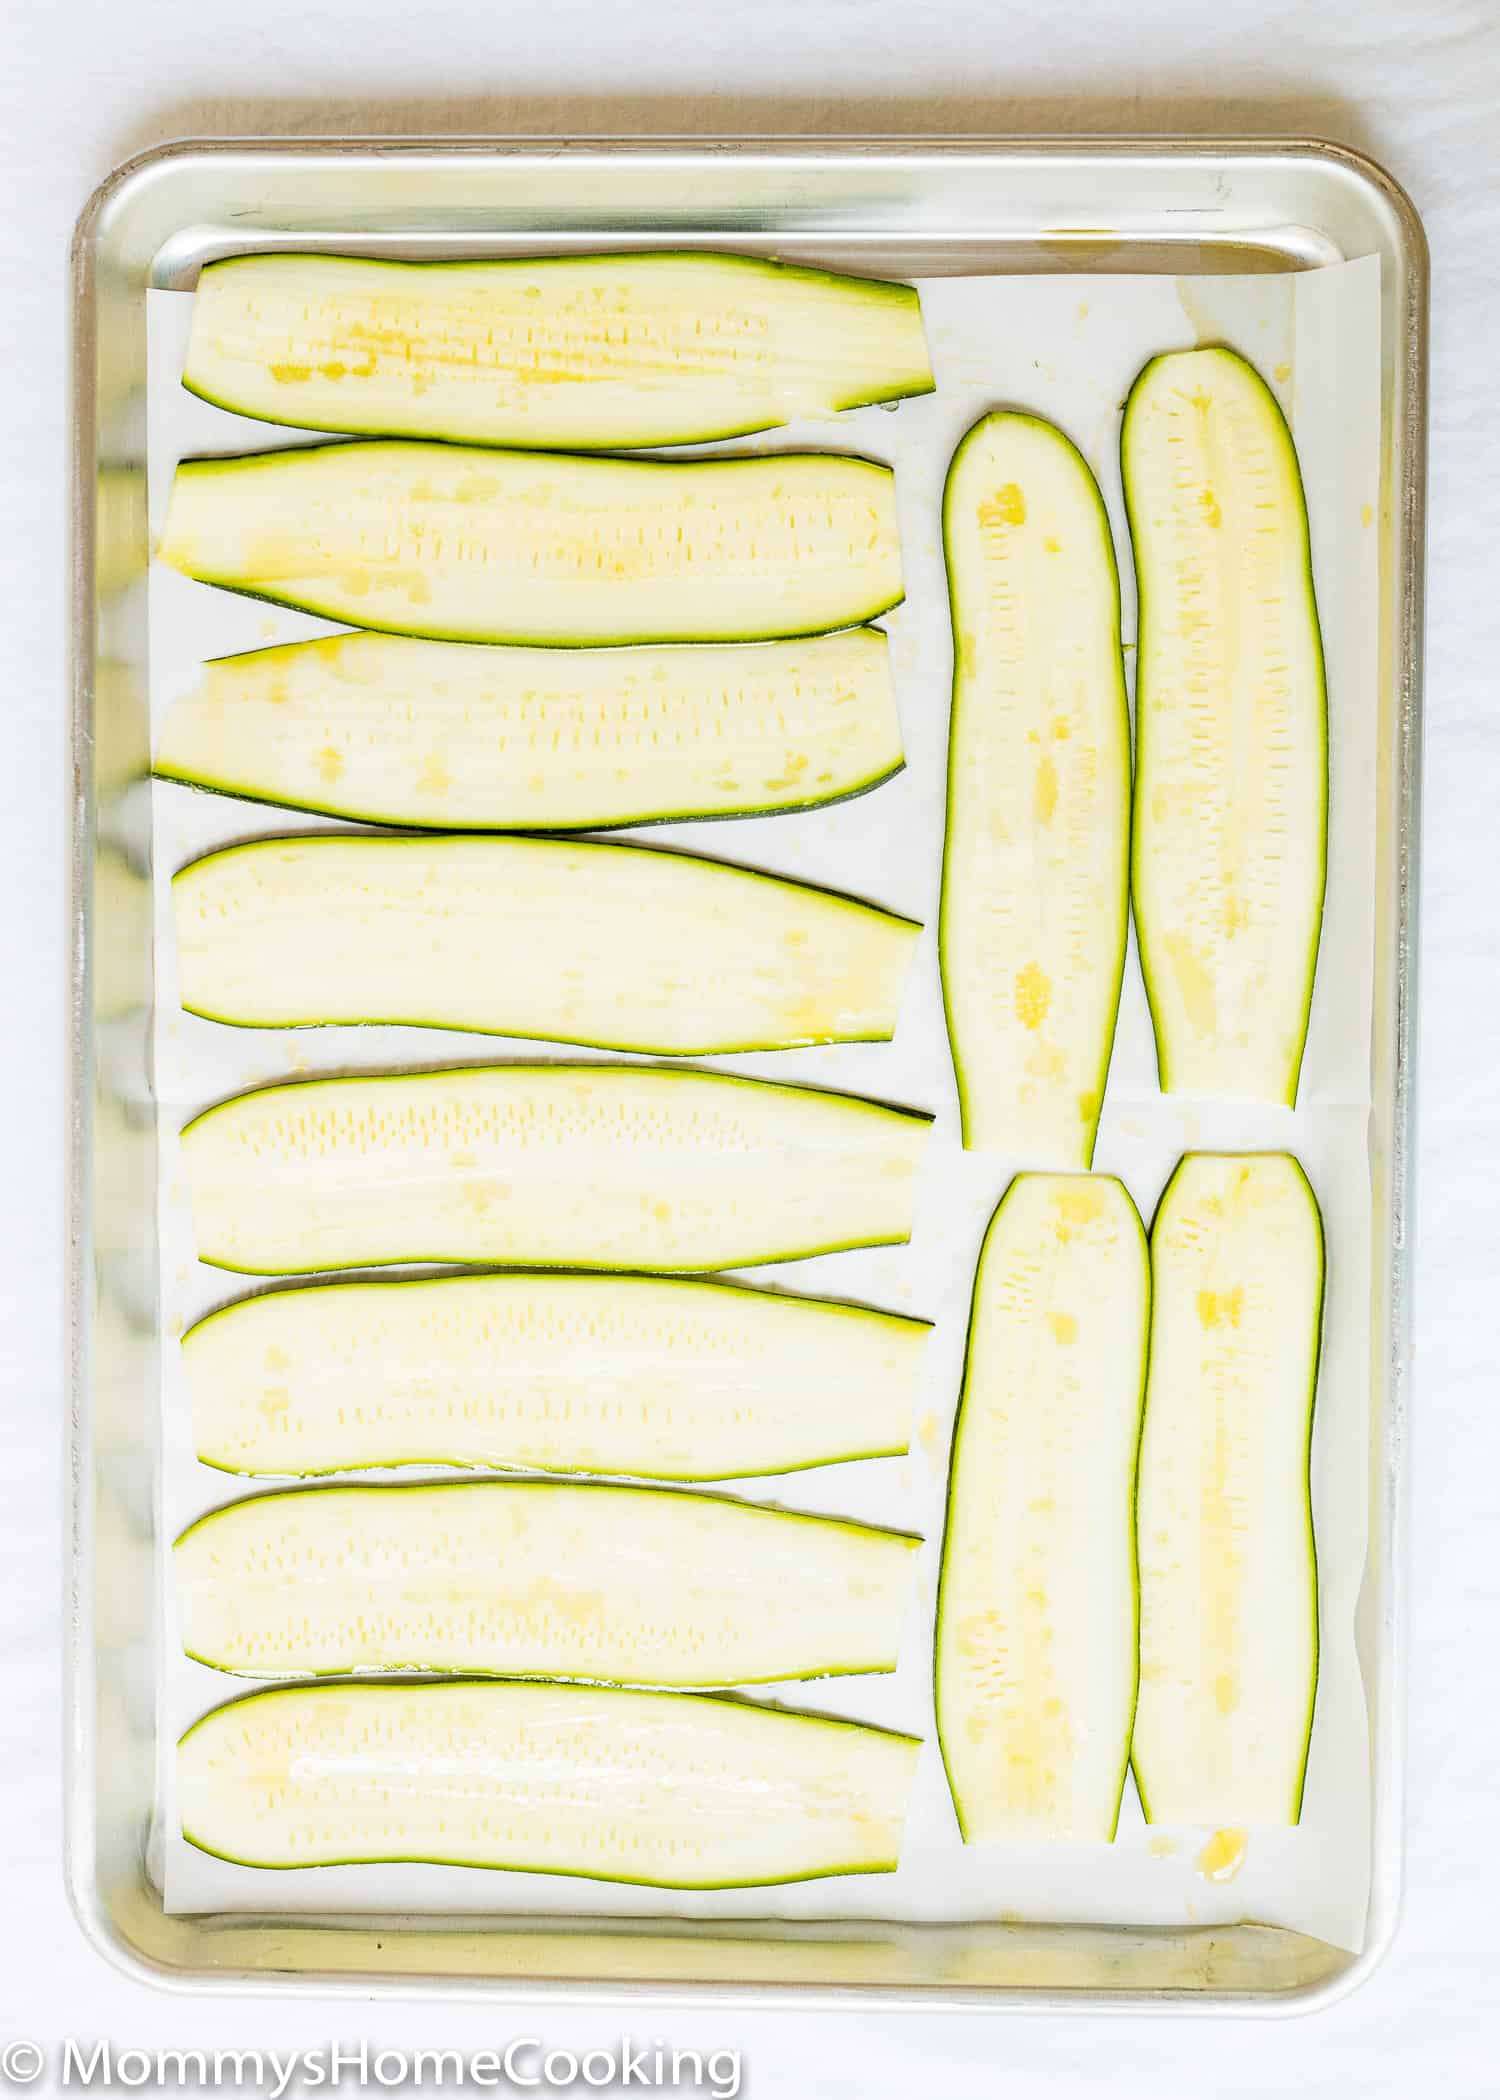 slices of zucchini on a baking tray